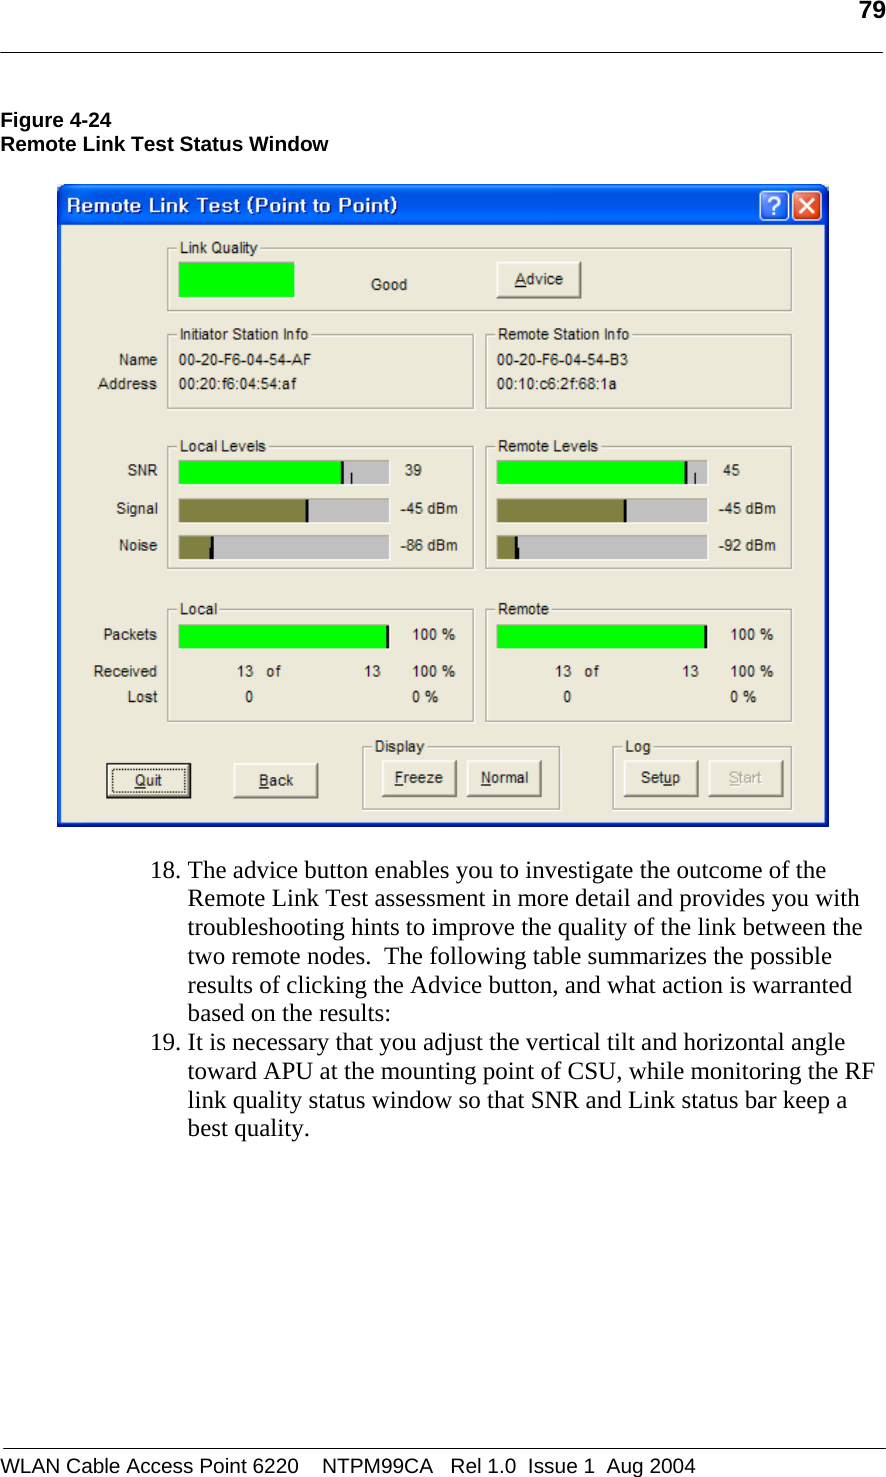   79  Figure 4-24 Remote Link Test Status Window    18. The advice button enables you to investigate the outcome of the Remote Link Test assessment in more detail and provides you with troubleshooting hints to improve the quality of the link between the two remote nodes.  The following table summarizes the possible results of clicking the Advice button, and what action is warranted based on the results: 19. It is necessary that you adjust the vertical tilt and horizontal angle toward APU at the mounting point of CSU, while monitoring the RF link quality status window so that SNR and Link status bar keep a best quality.  WLAN Cable Access Point 6220    NTPM99CA   Rel 1.0  Issue 1  Aug 2004 